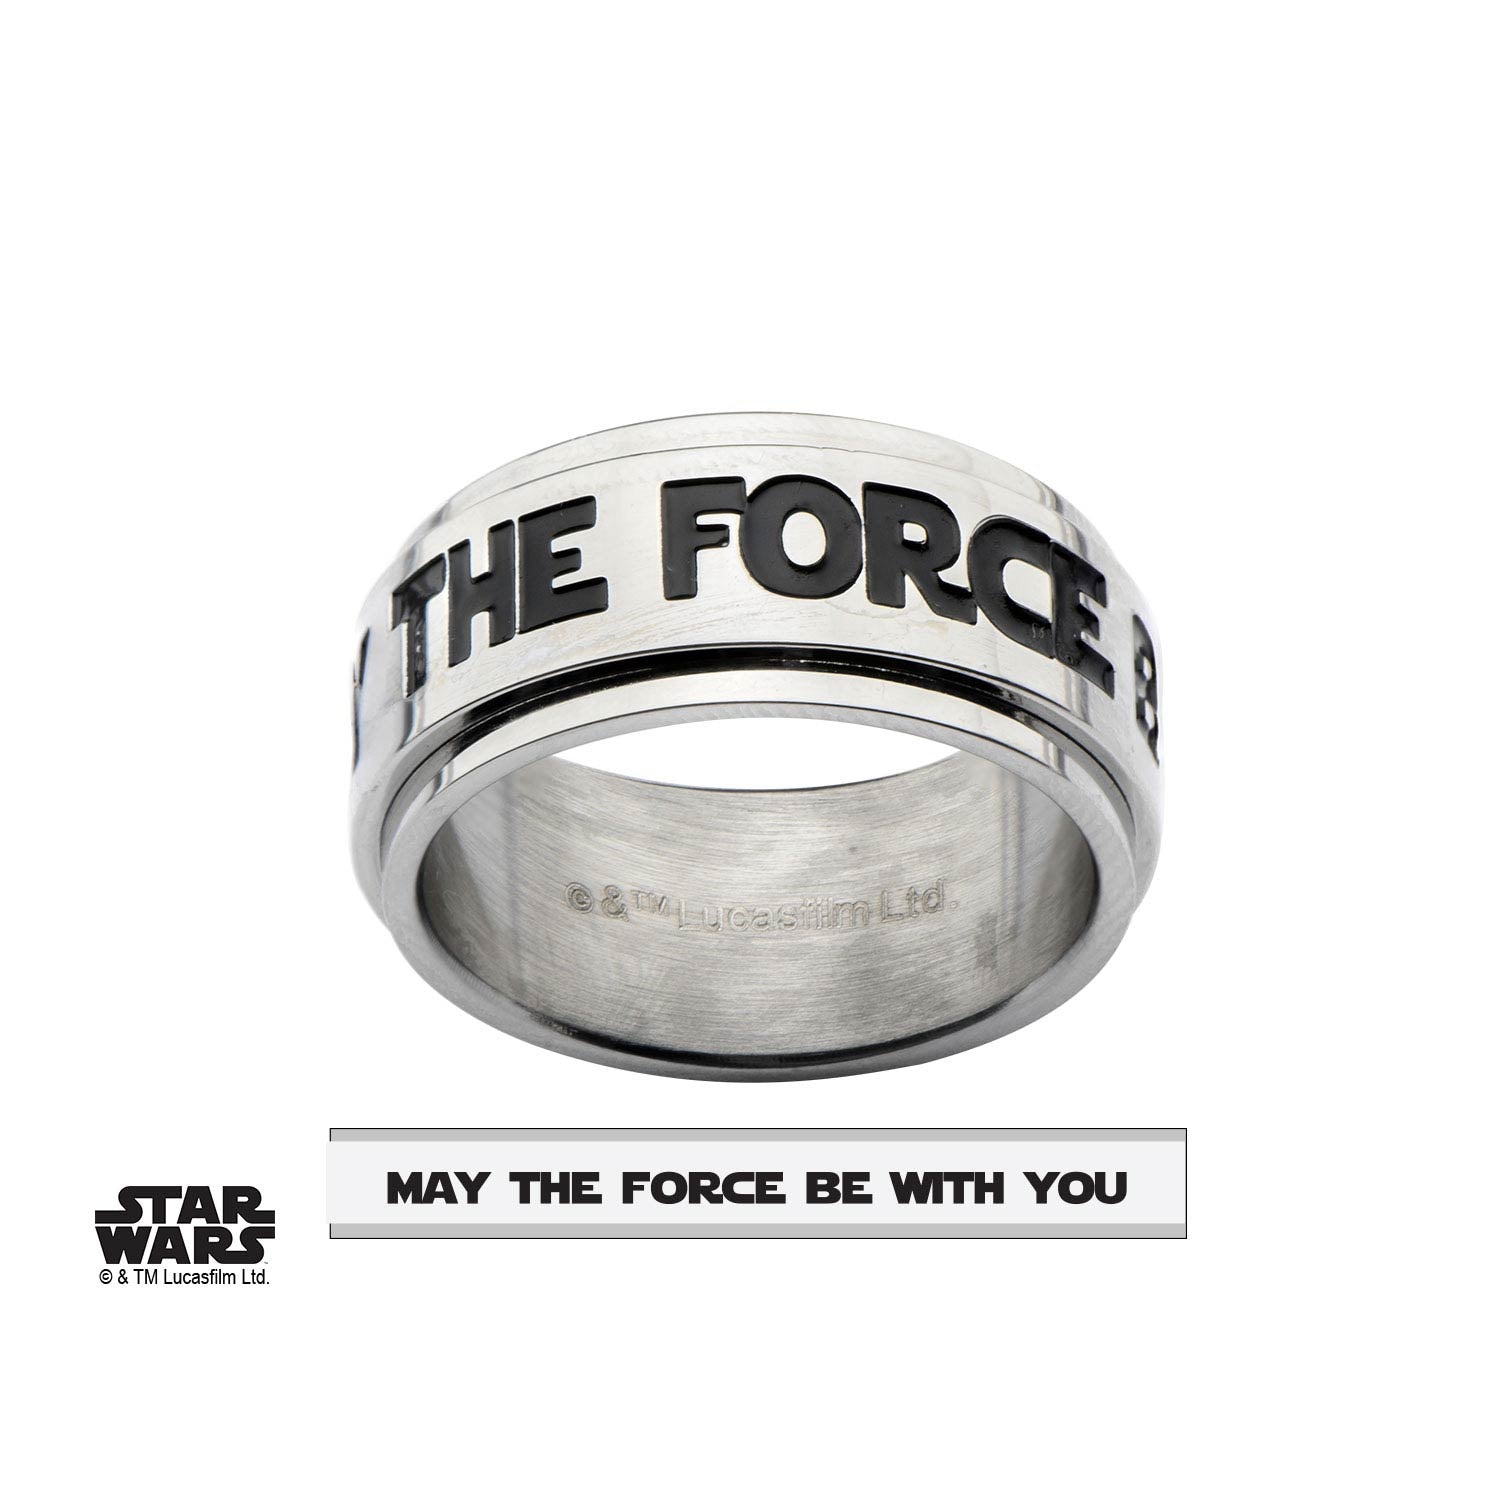 Star Wars "MAY THE FORCE BE WITH YOU"Spinner Ring